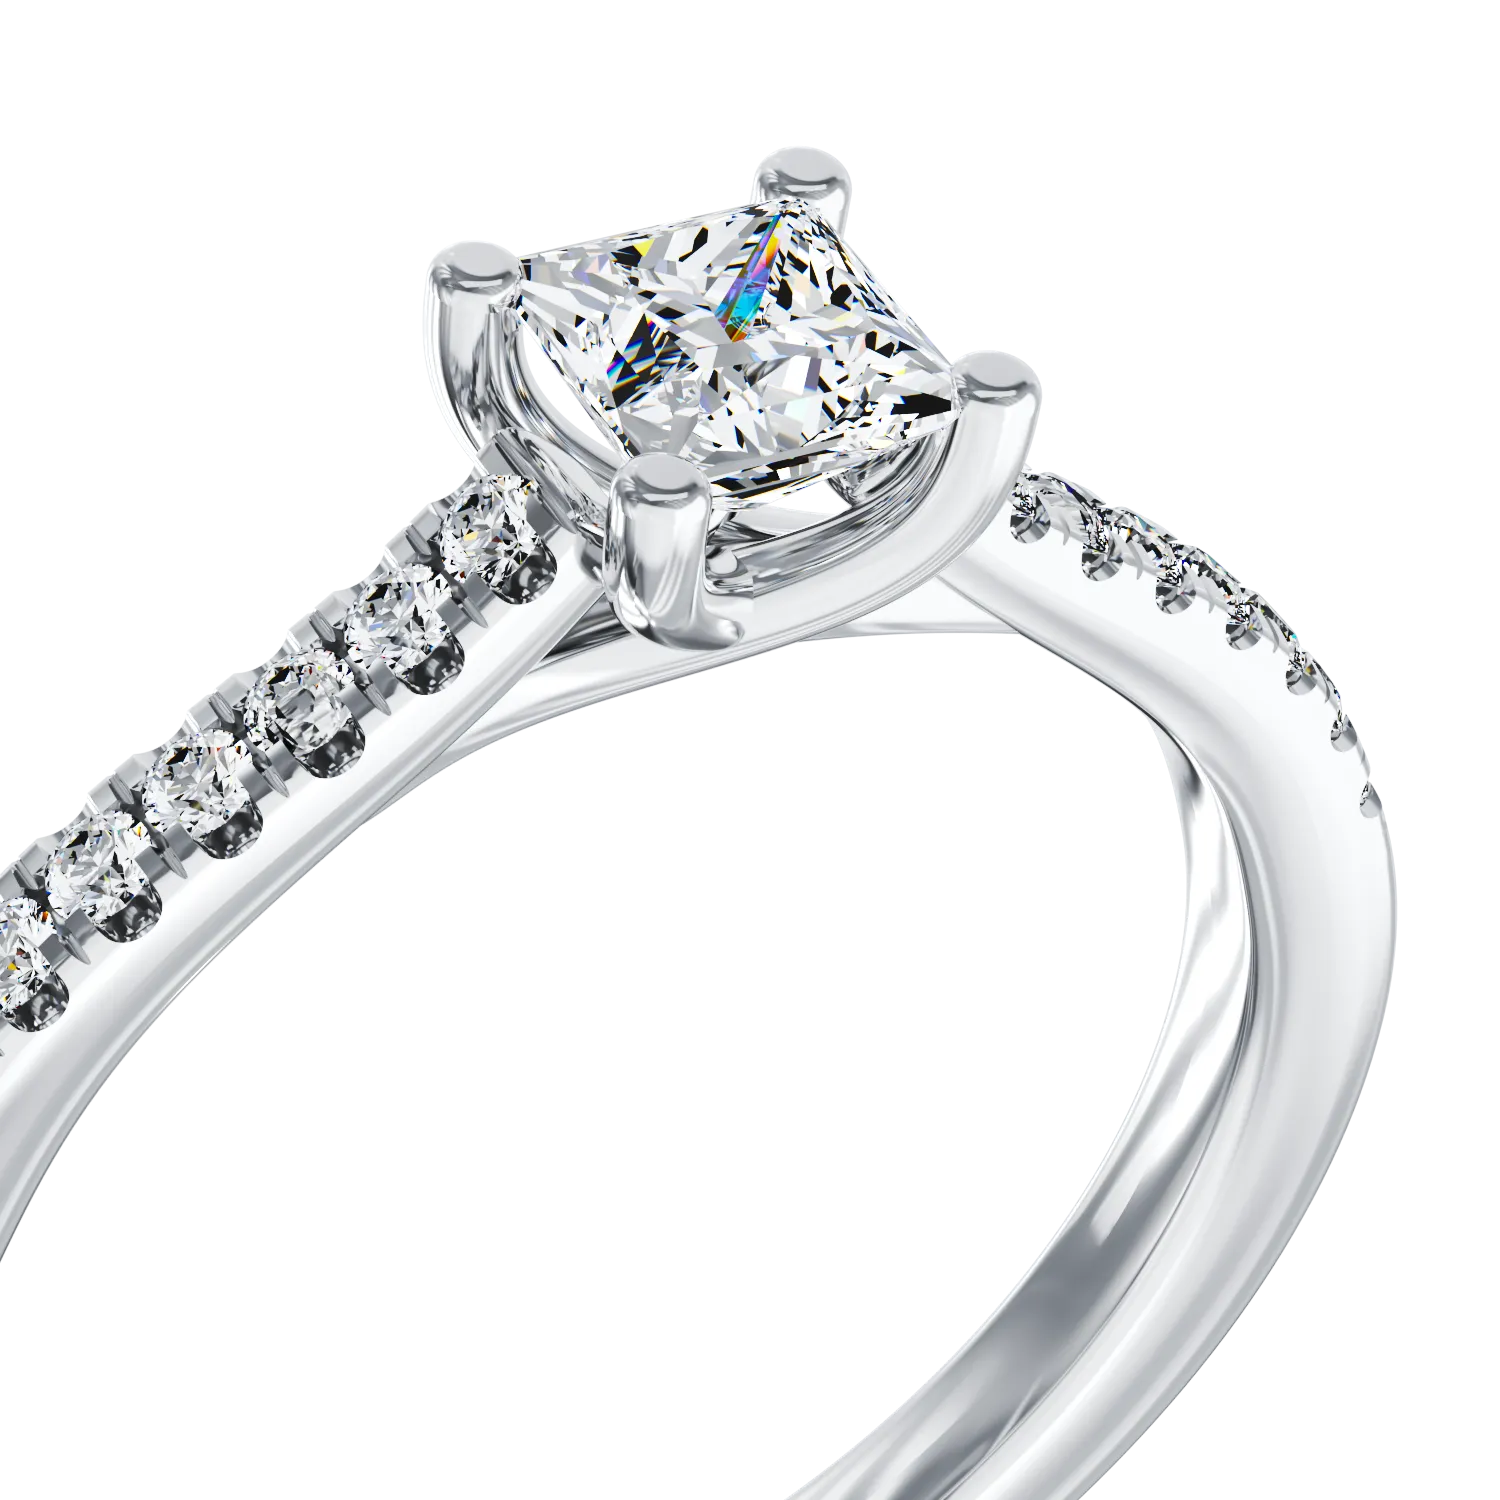 18K white gold engagement ring with 0.45ct diamond and 0.17ct diamonds